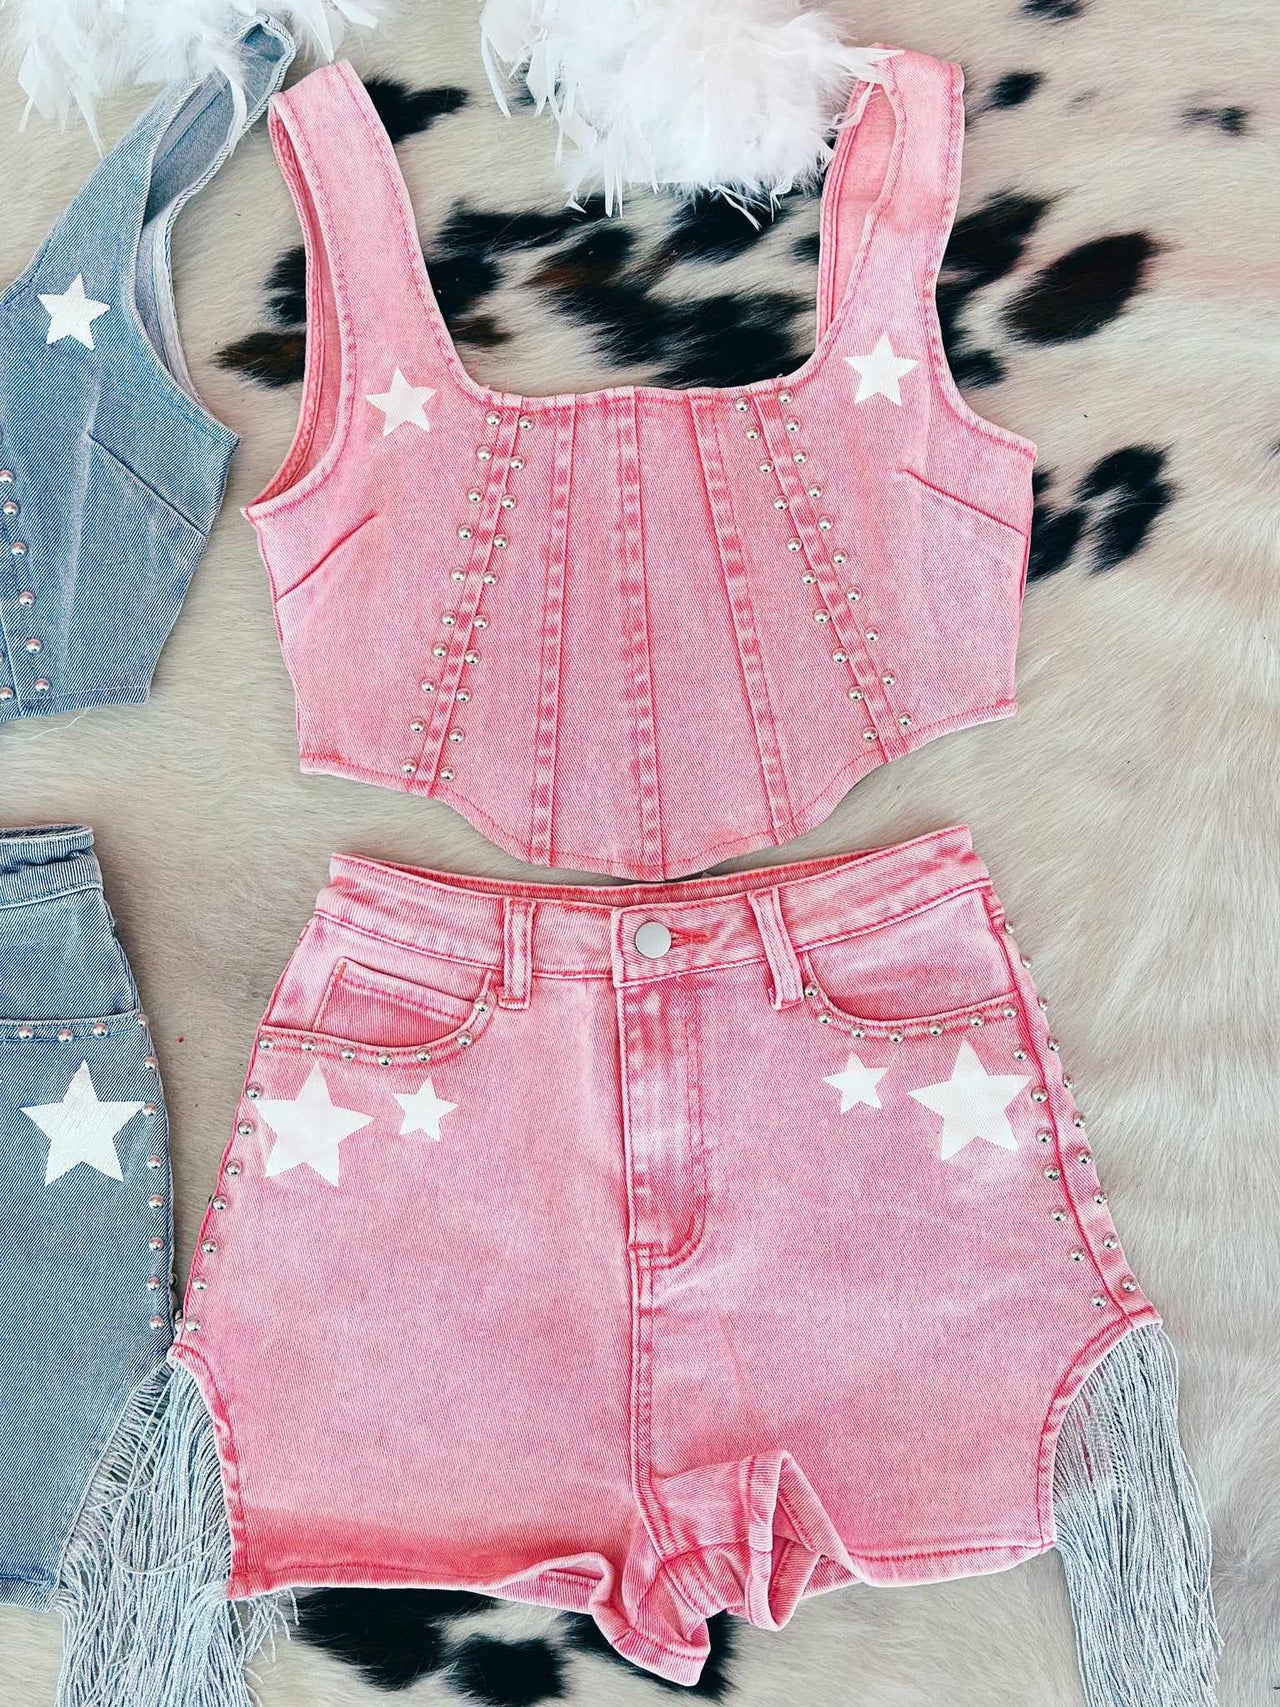 Pink denim crop top and shorts  with stars.